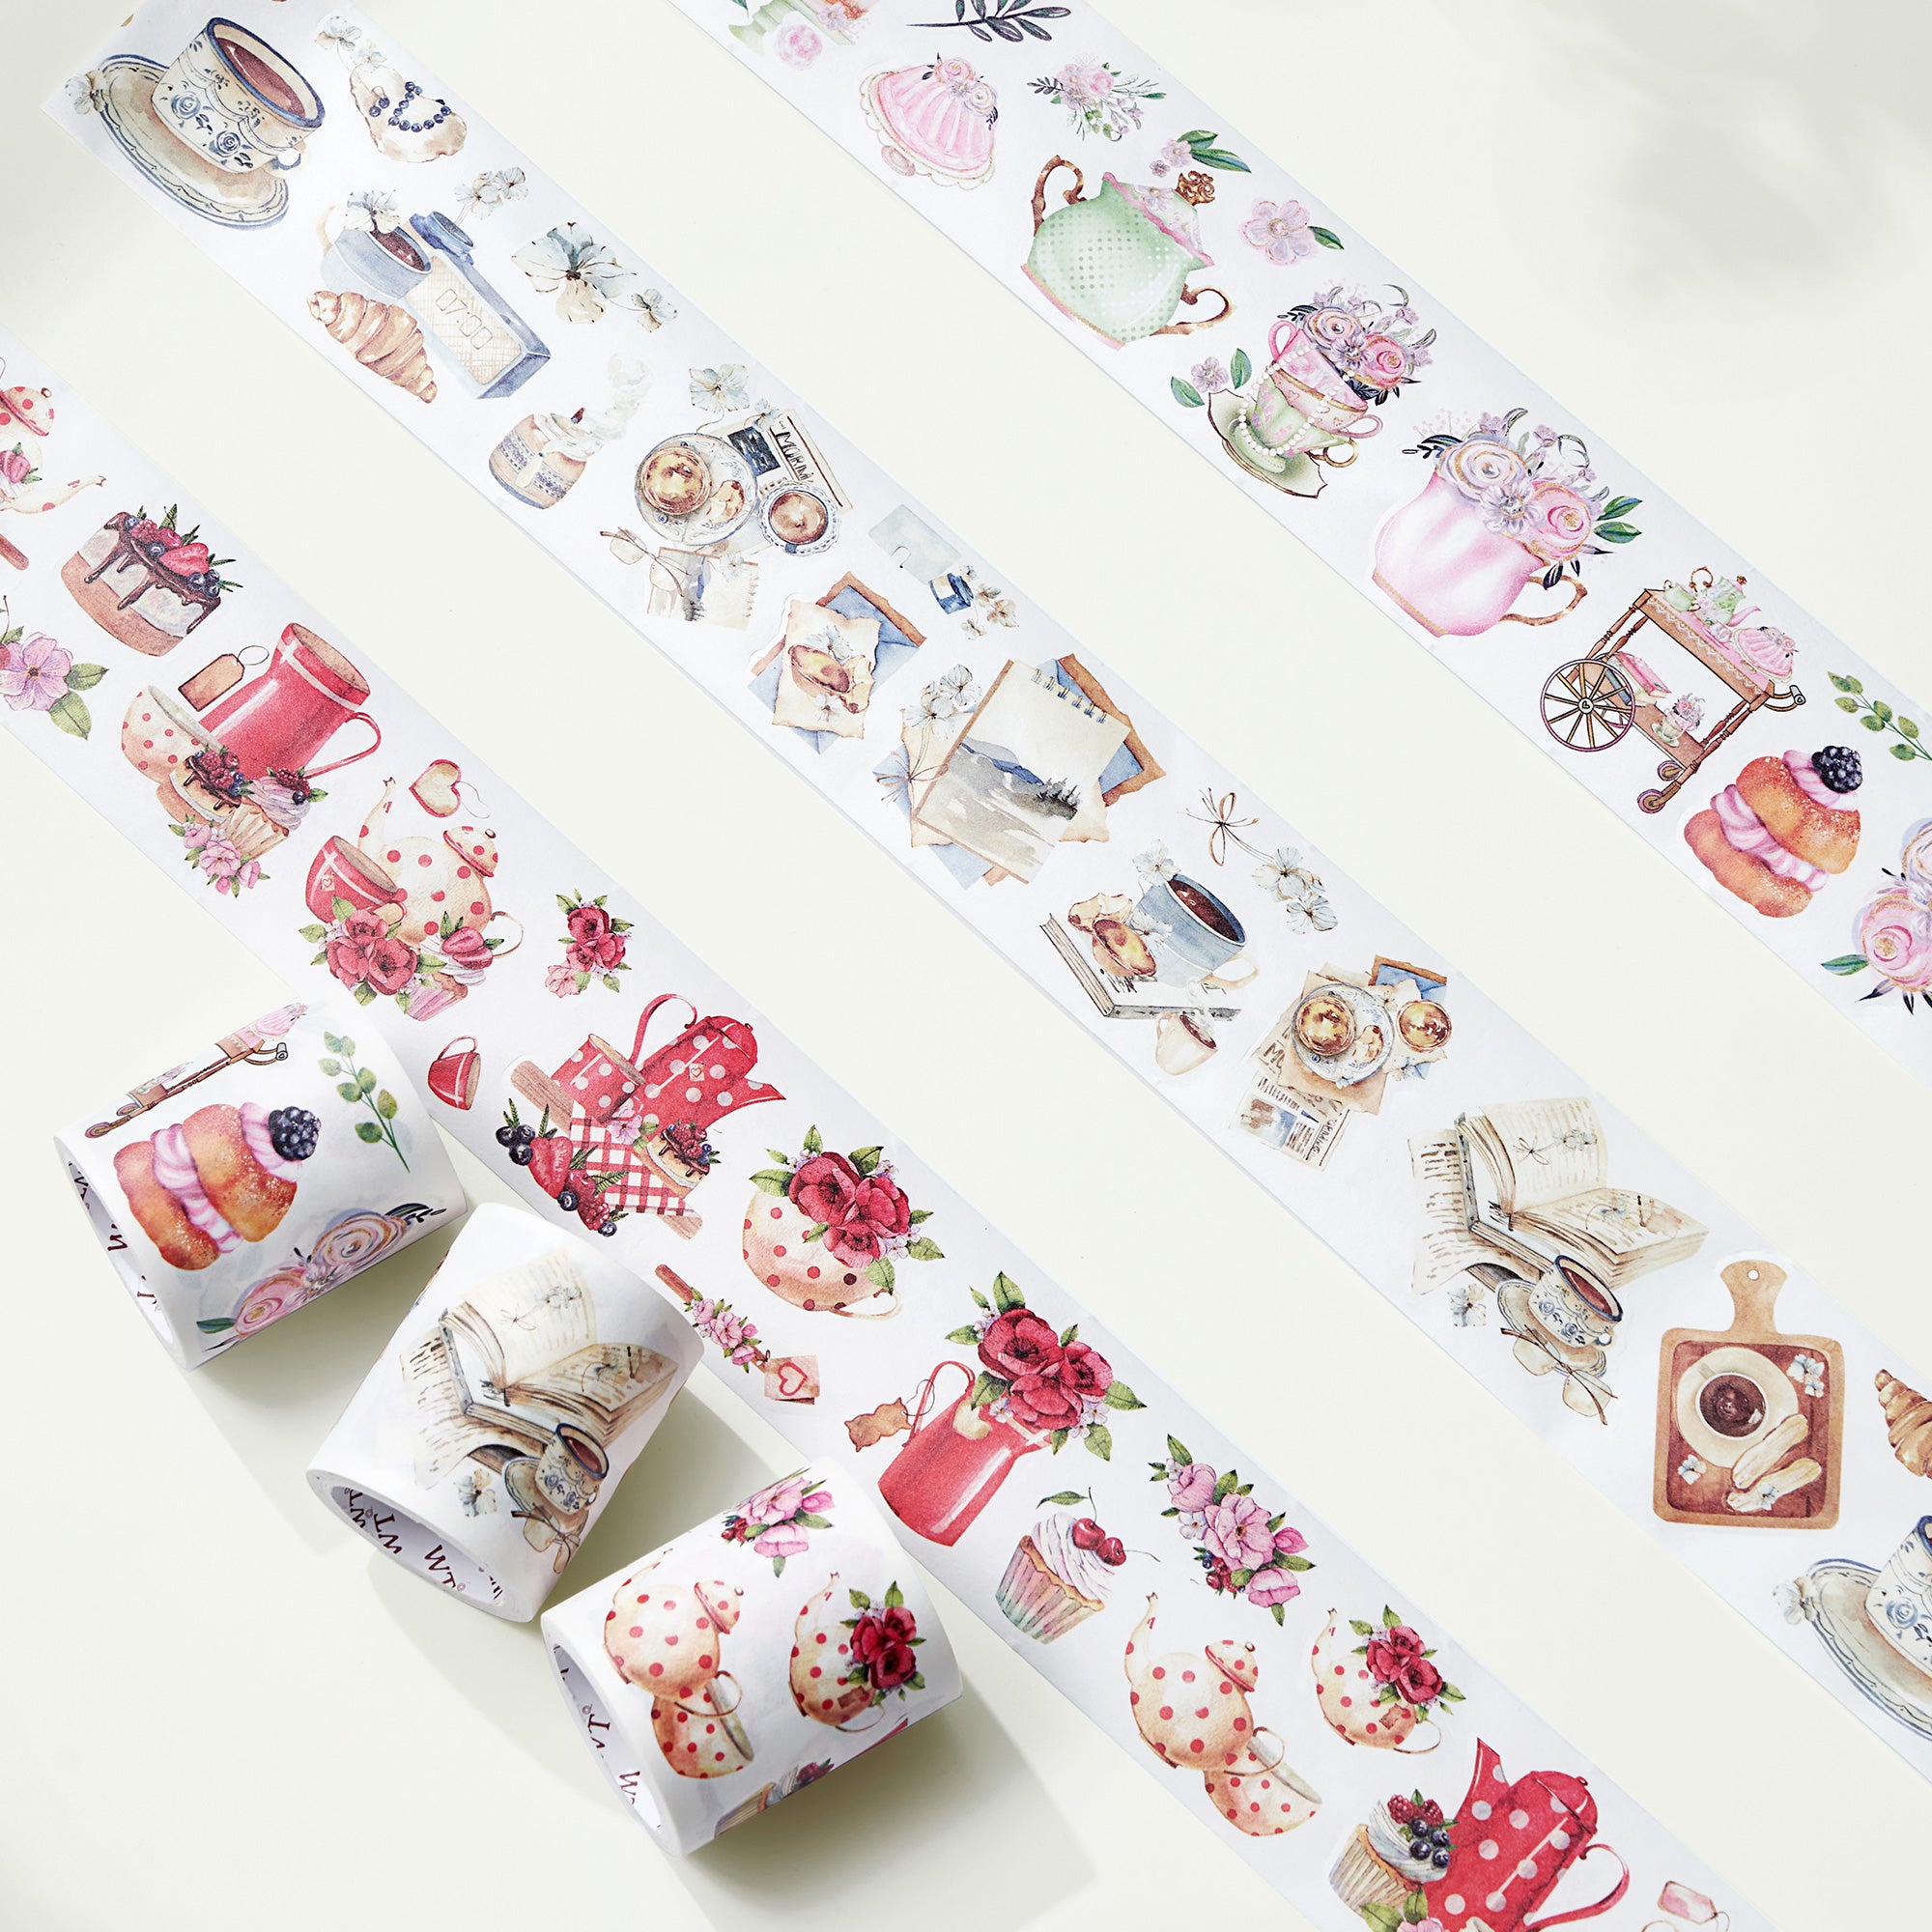 Cute ideas for storing washi tape and sticker sheets